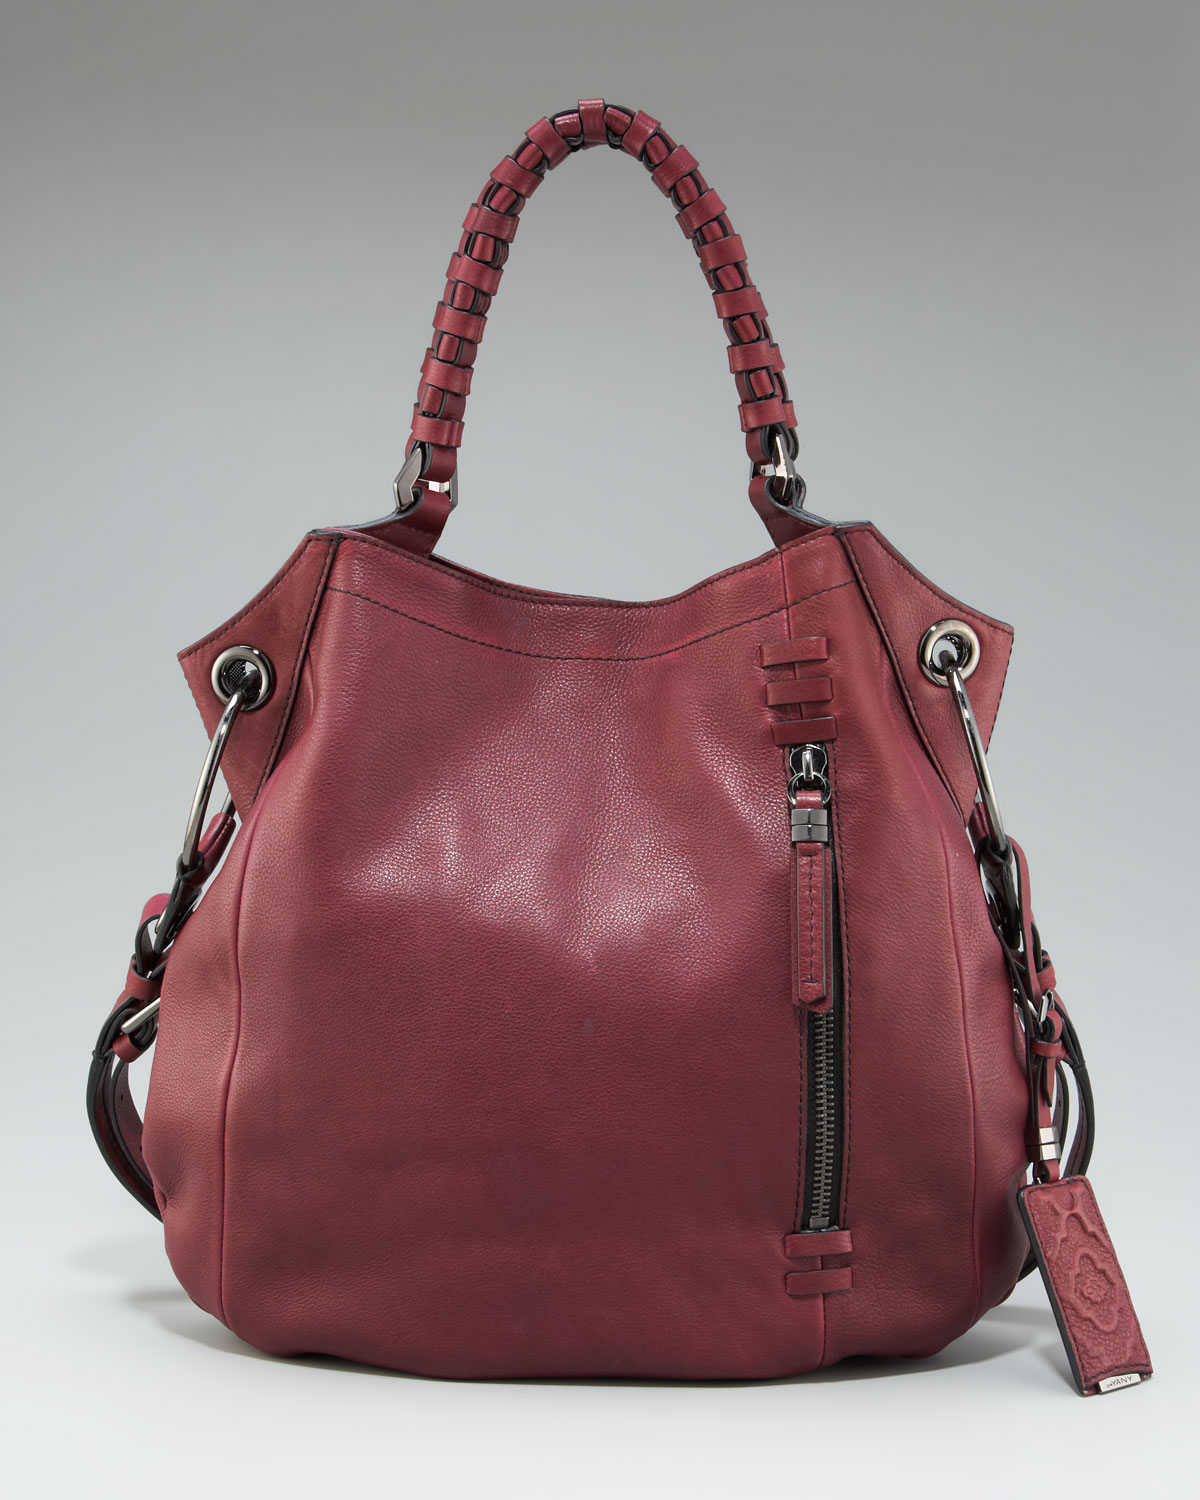 Lyst - Oryany Sydney Convertible Tote in Red